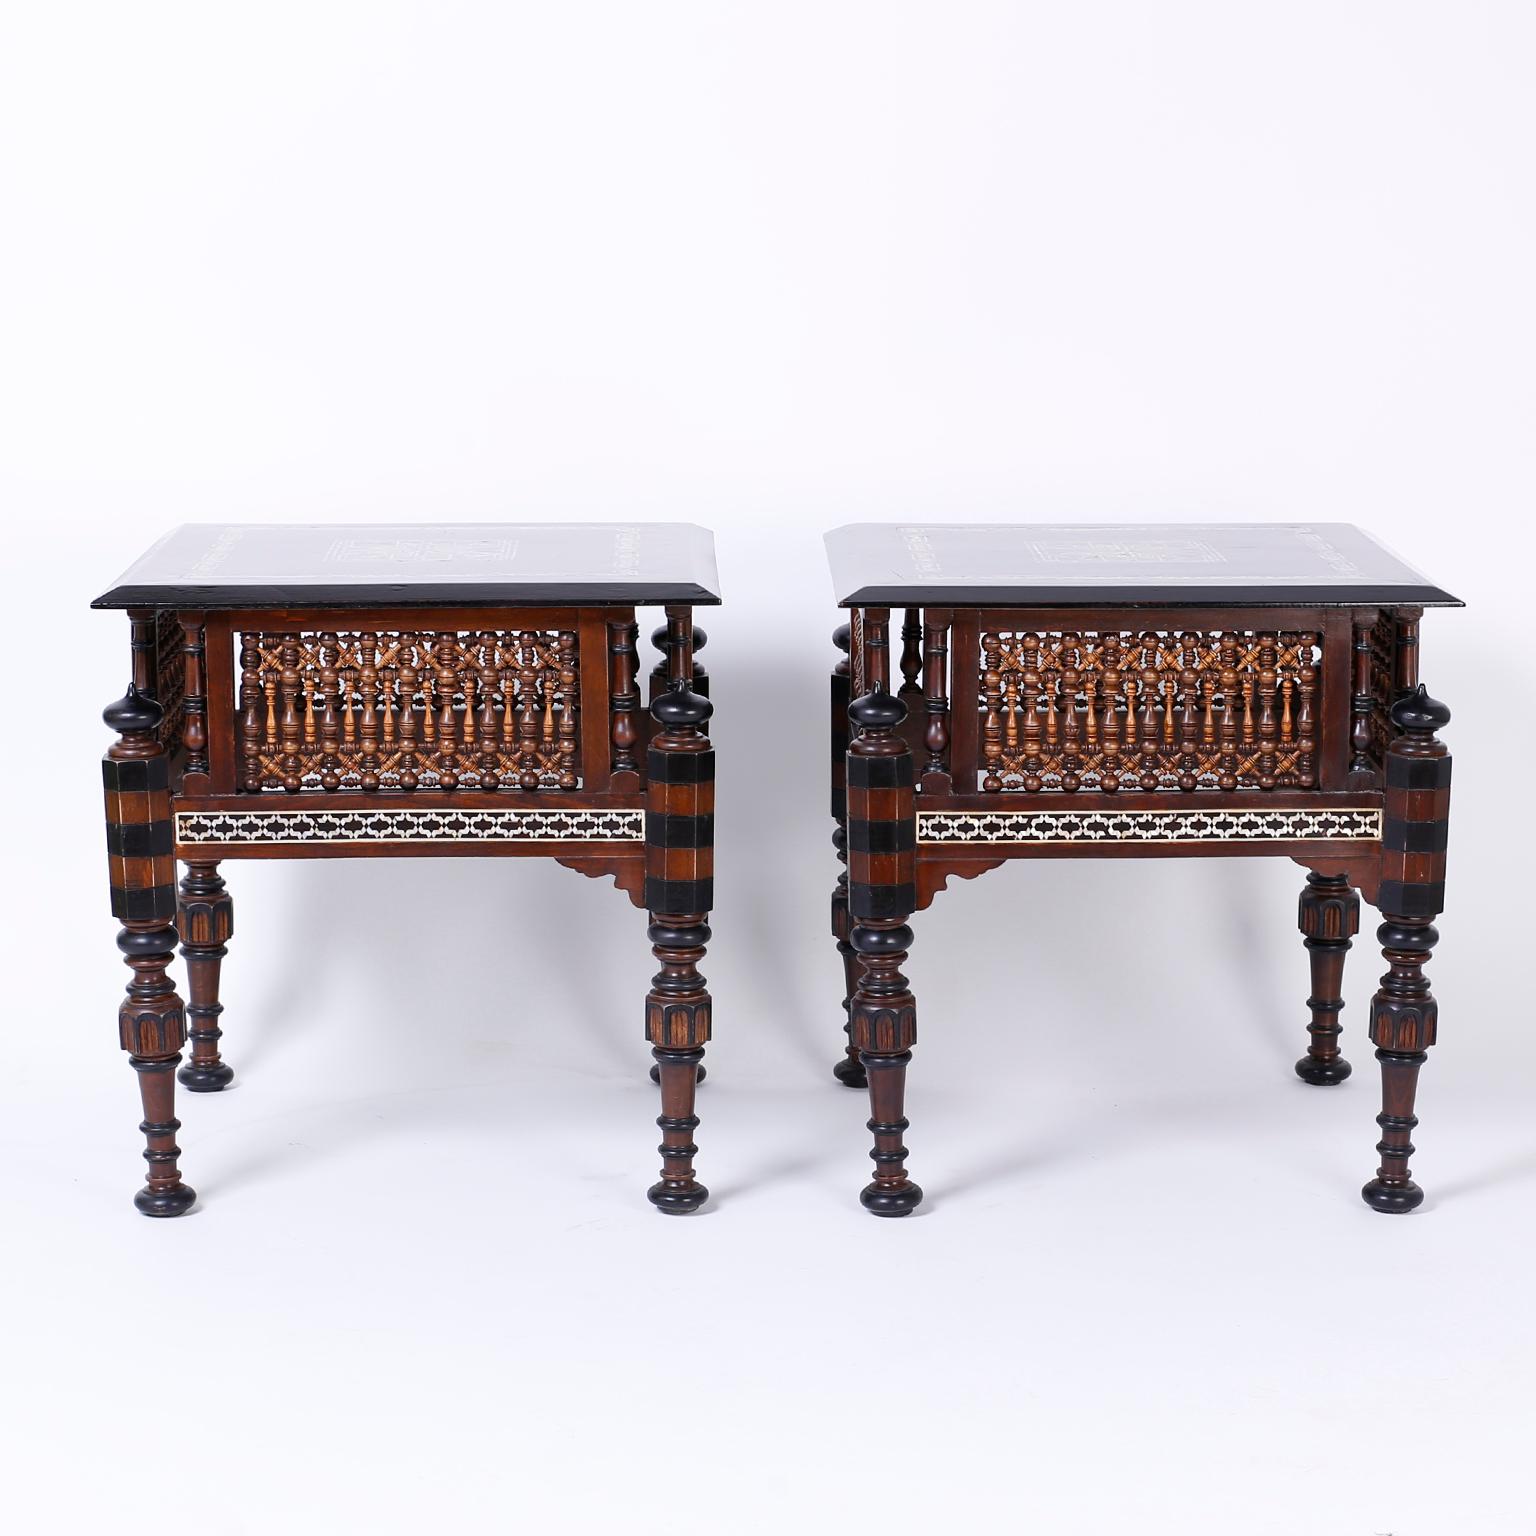 Lofty pair of Syrian side or end tables crafted in exotic hard woods with inlaid mother of pearl and tortoiseshell geometric designs. The bases have an architecturally intriguing Moorish form with stick and ball panels and turned legs with ebonized